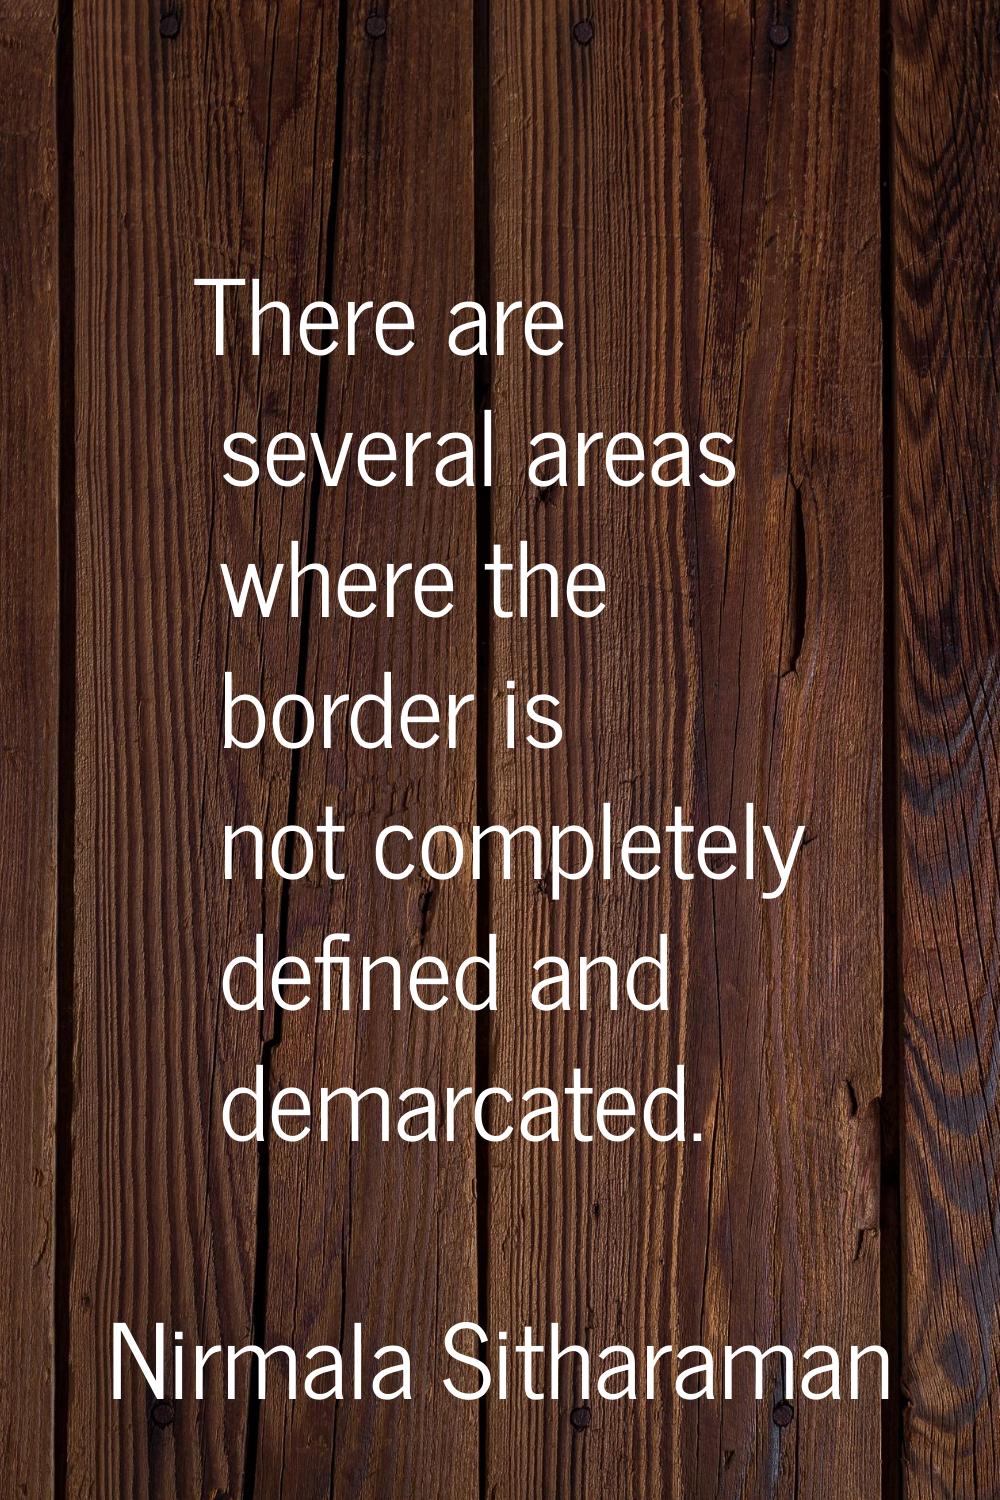 There are several areas where the border is not completely defined and demarcated.